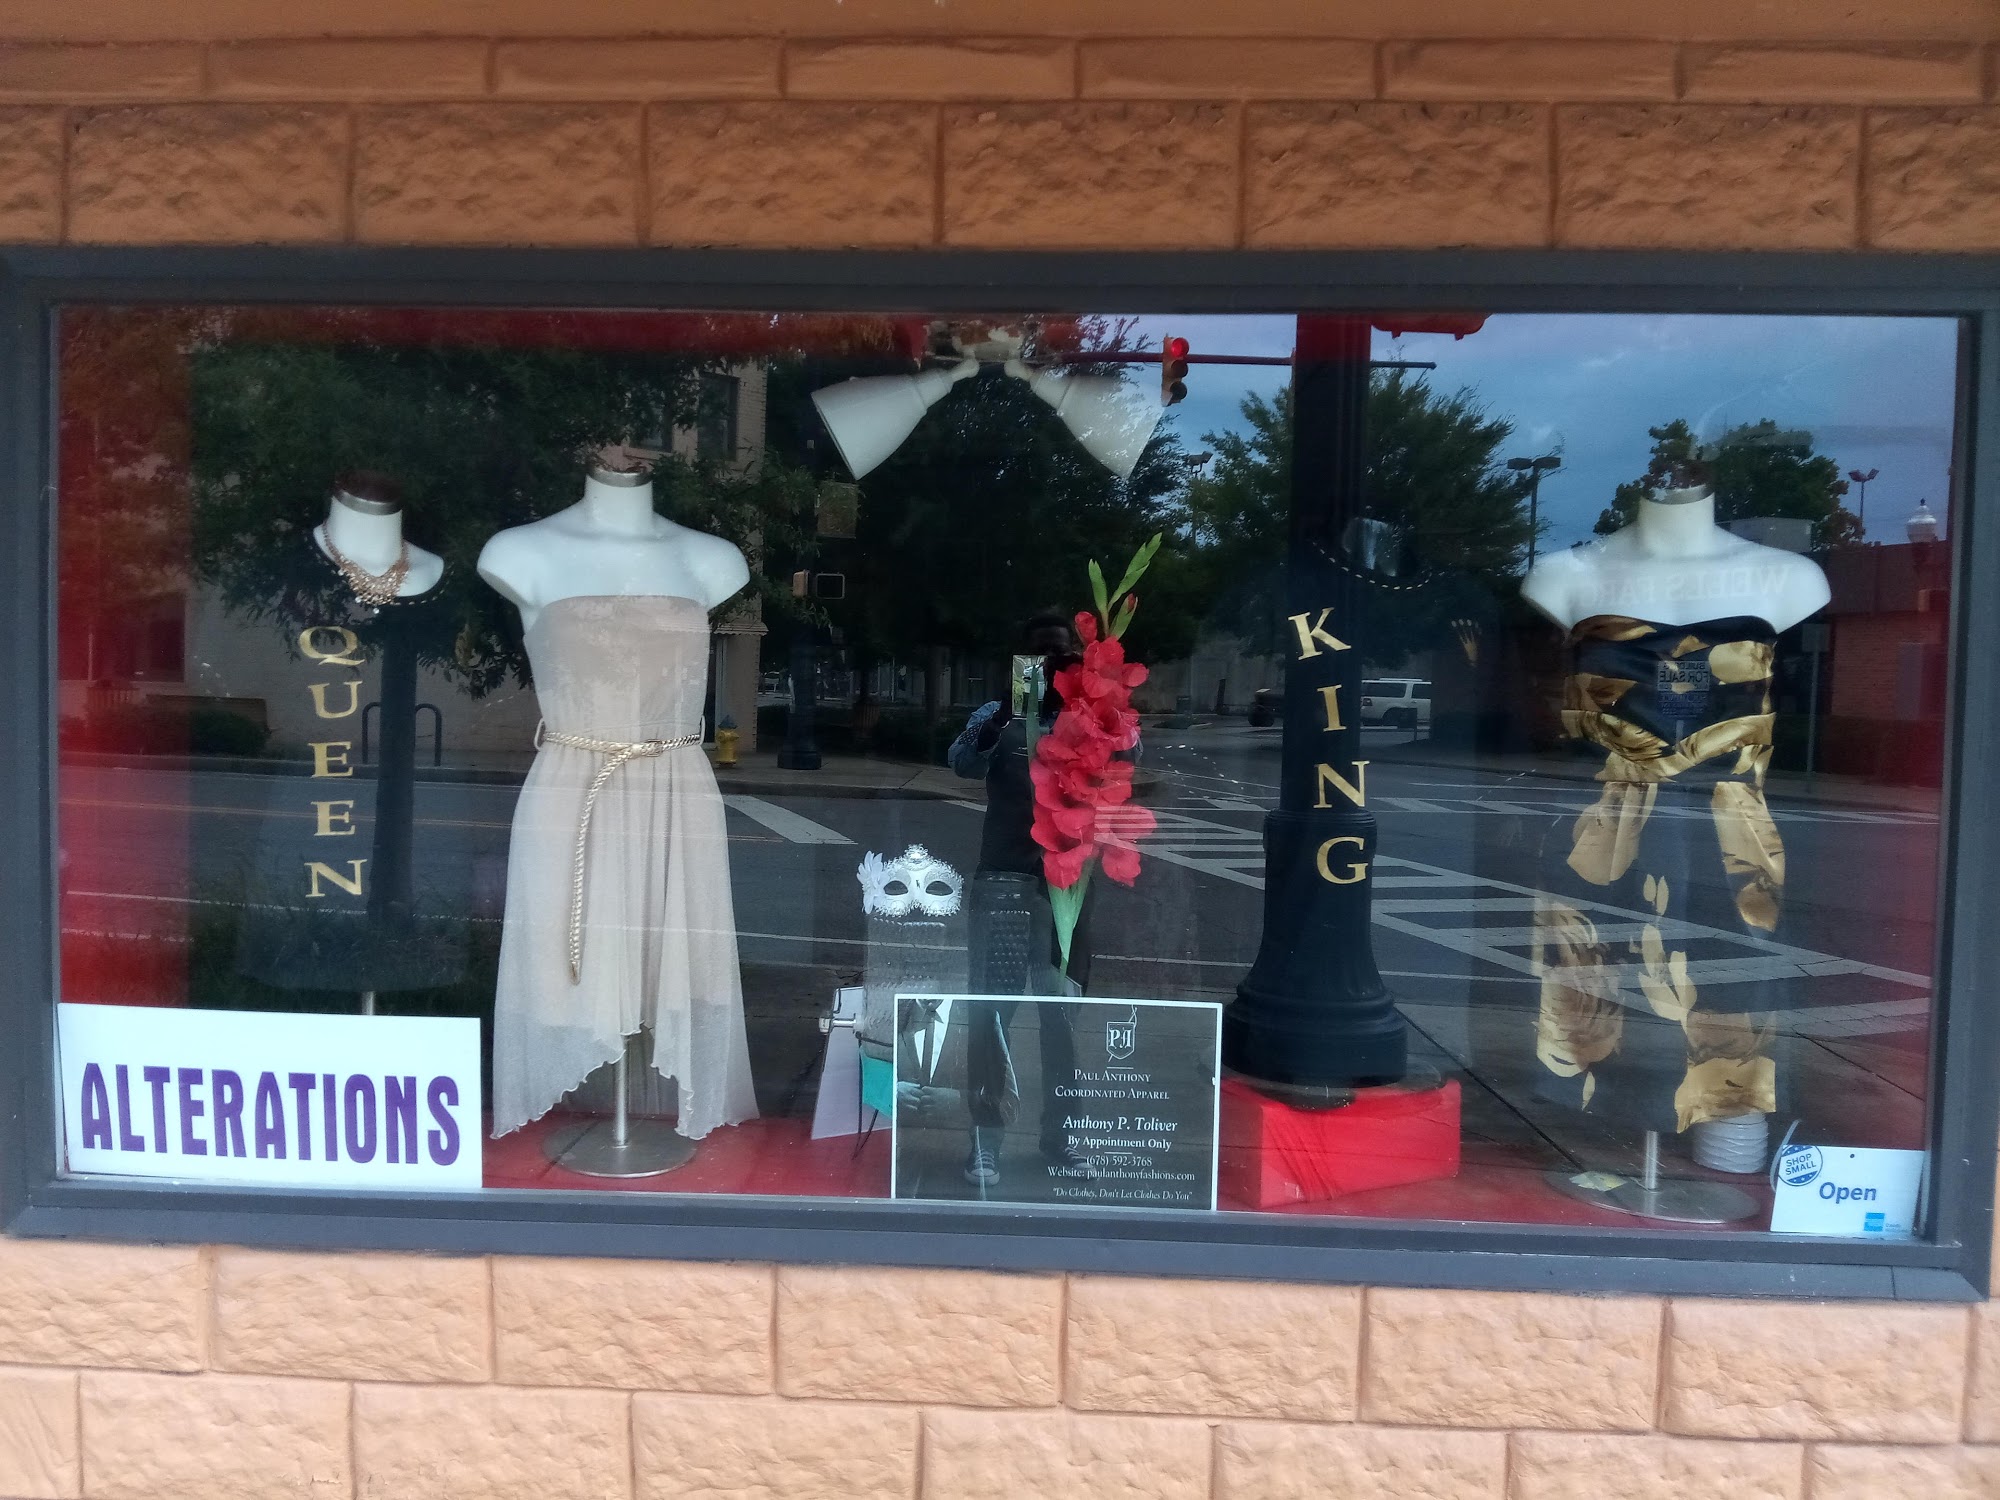 Paul Anthony Coordinated Apparel/PA Fly Apparel& Alterations